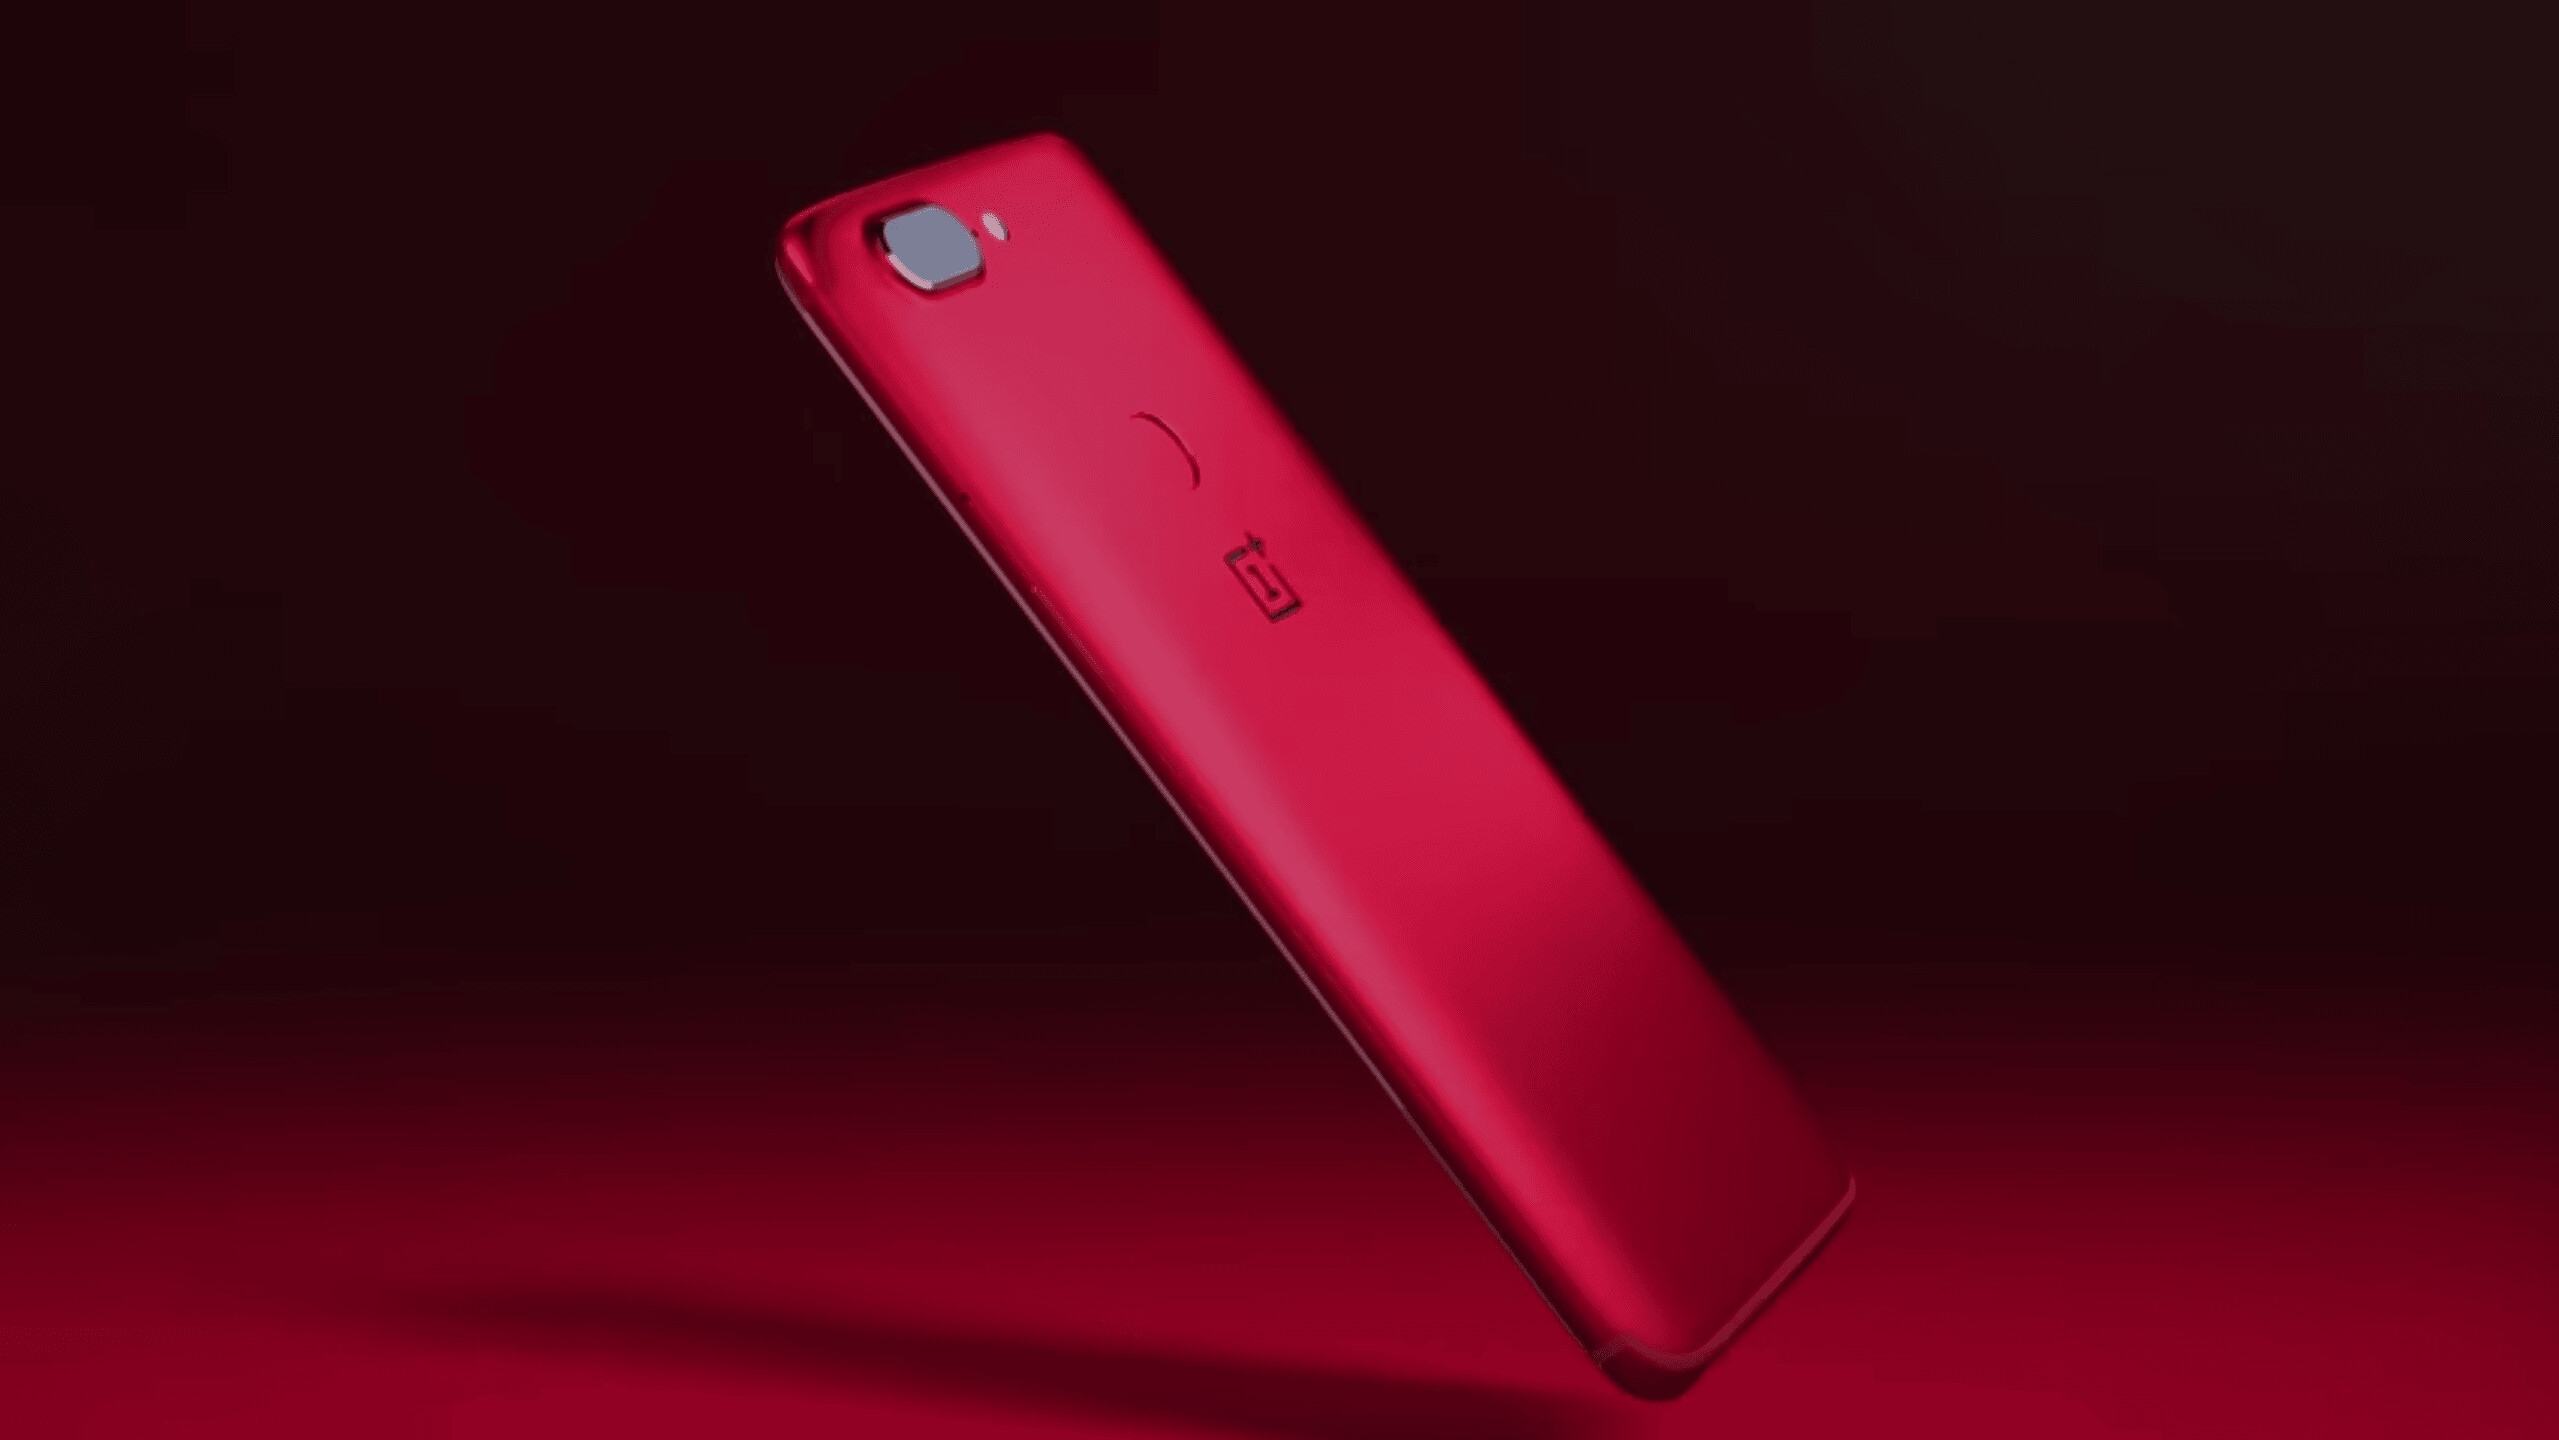 Red Valentine’s Day phones are now a thing, apparently